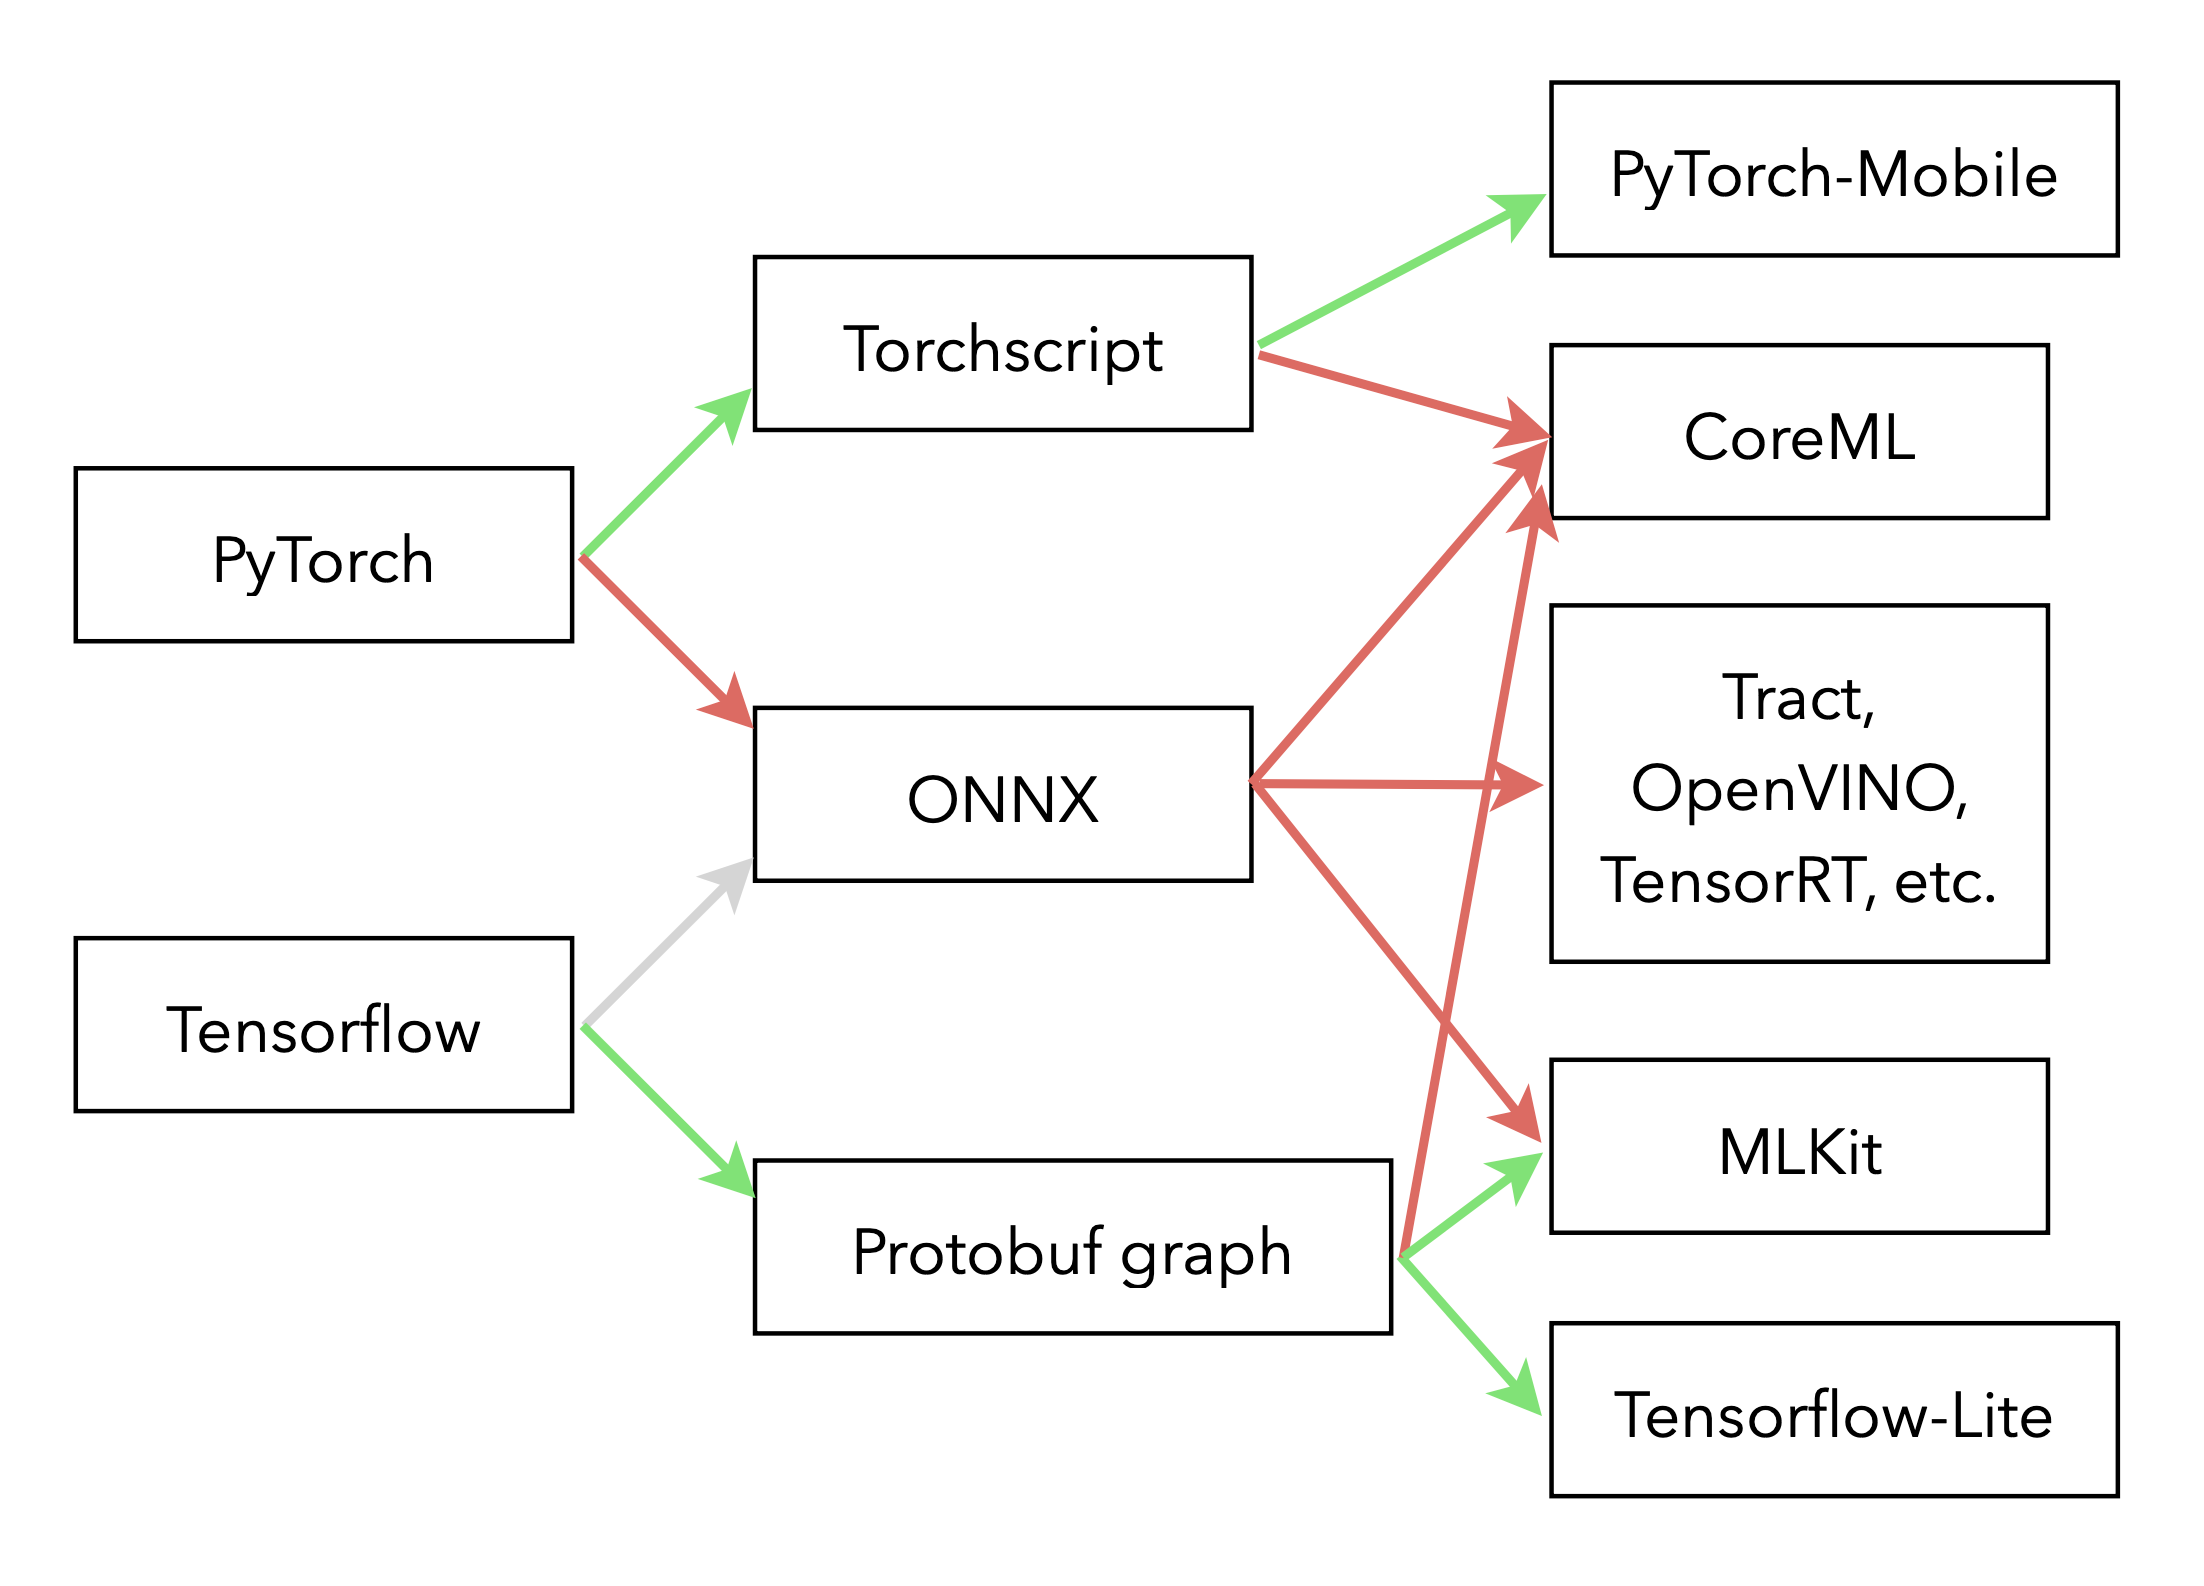 Conversion paths from deep learning frameworks to inference engines